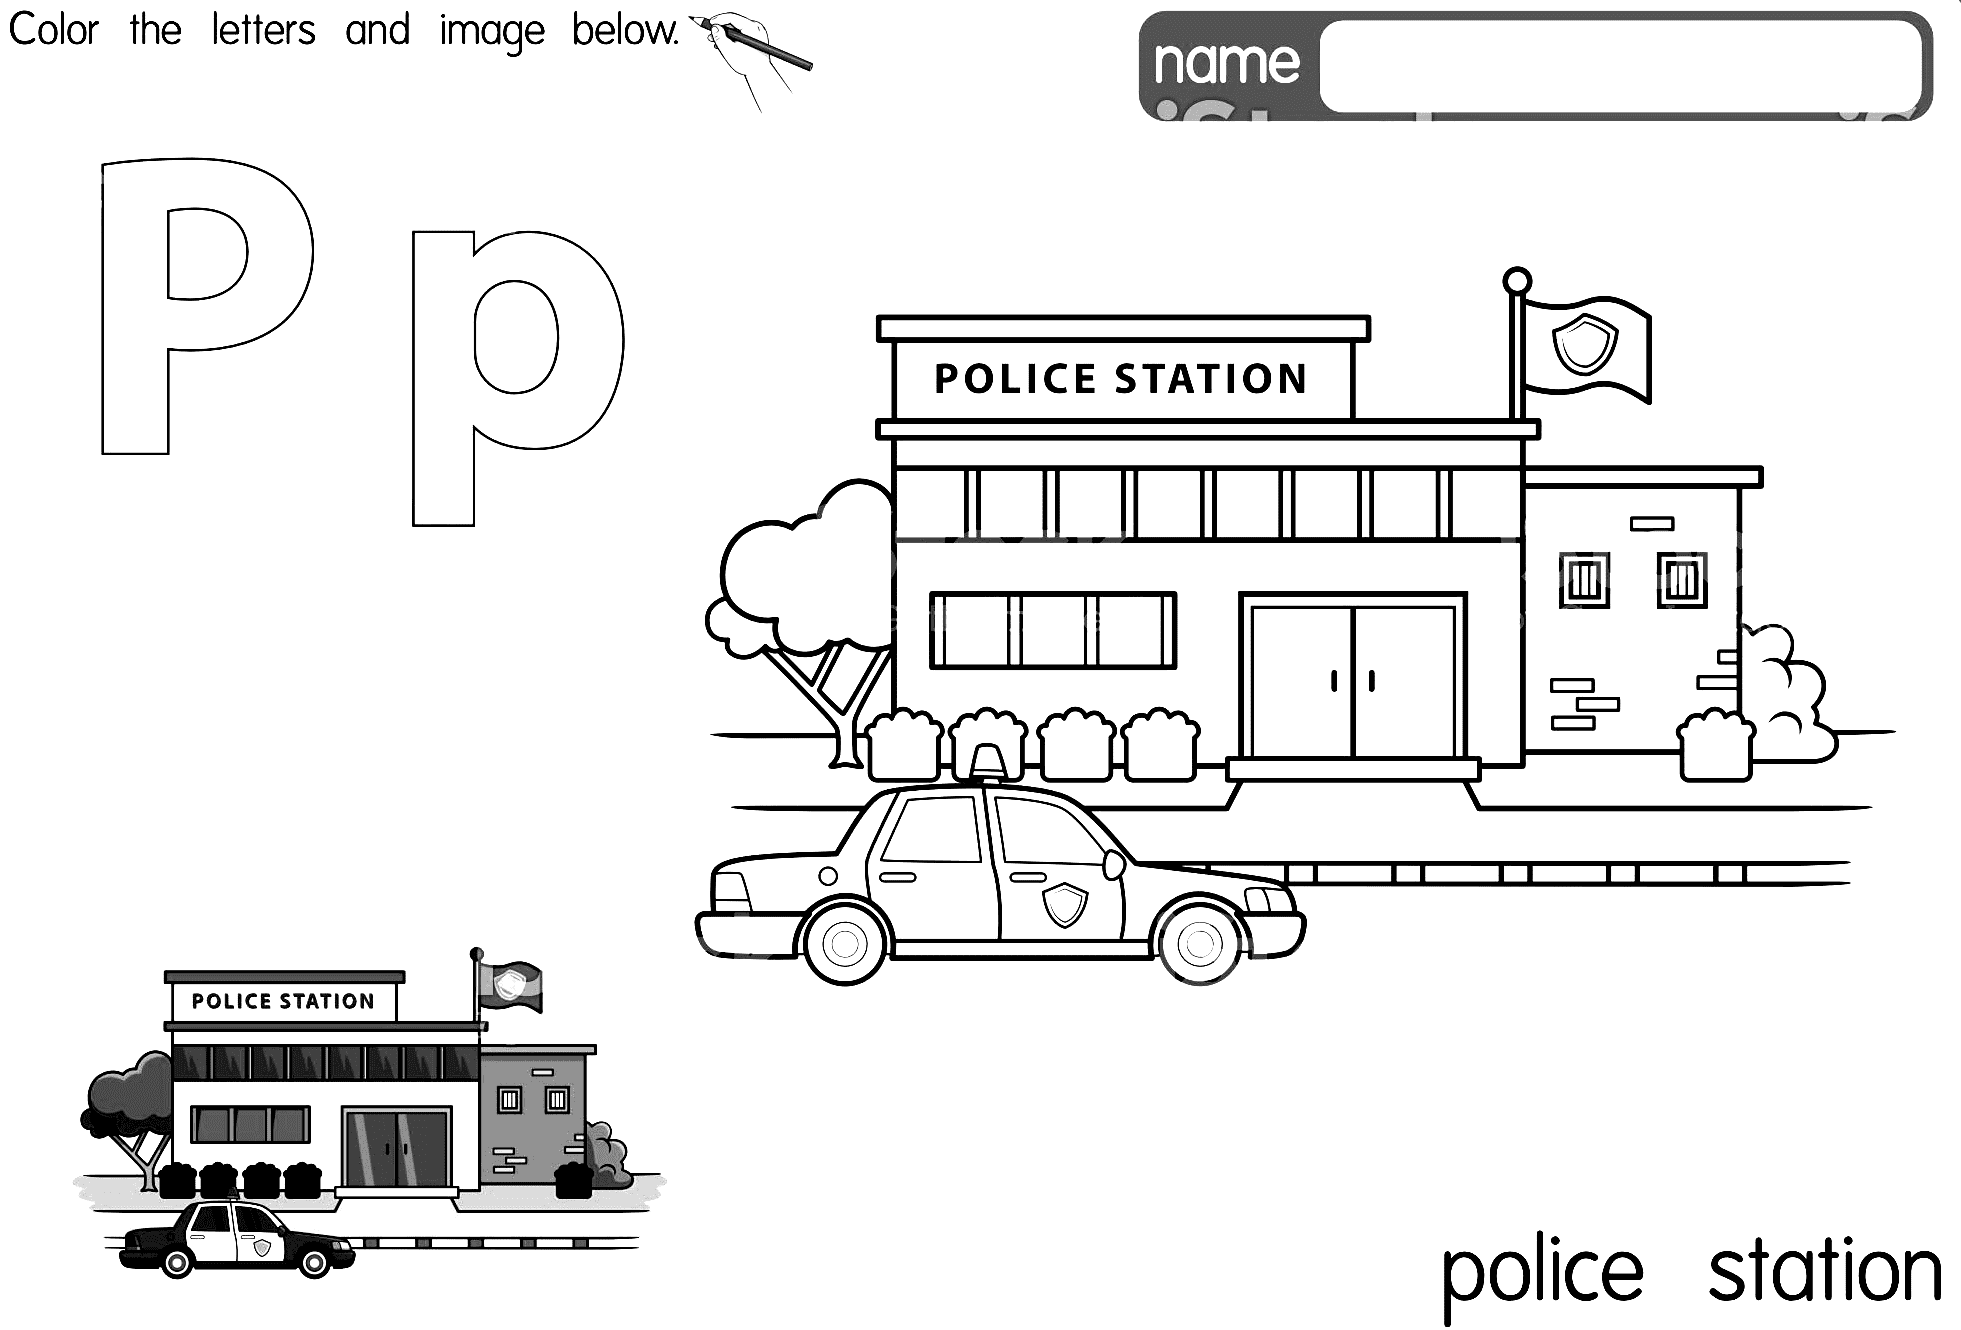 Police Station Image Coloring Page